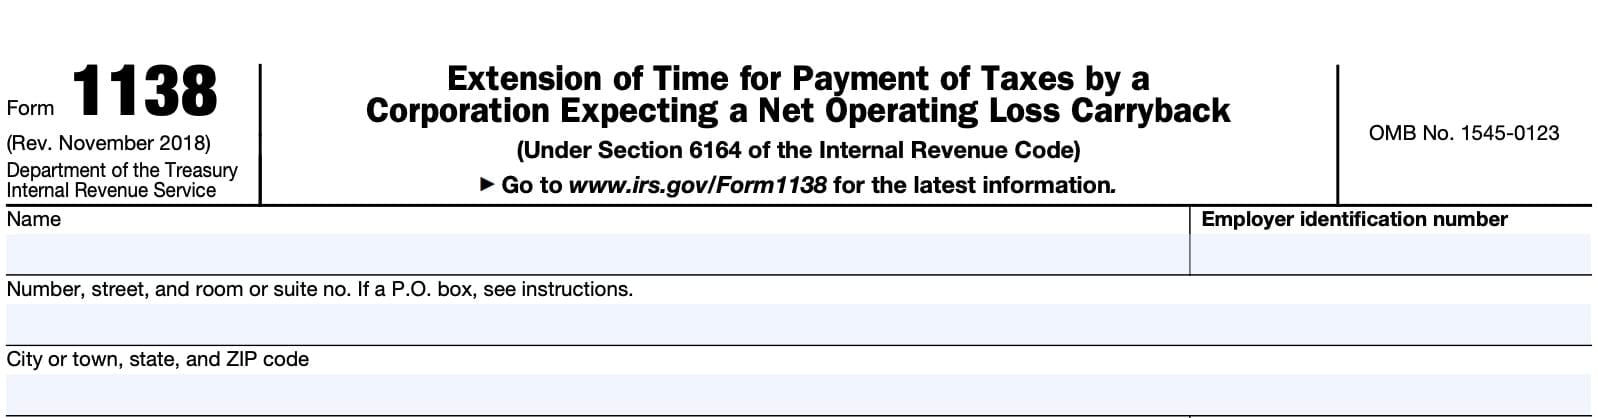 irs form 1138, taxpayer information